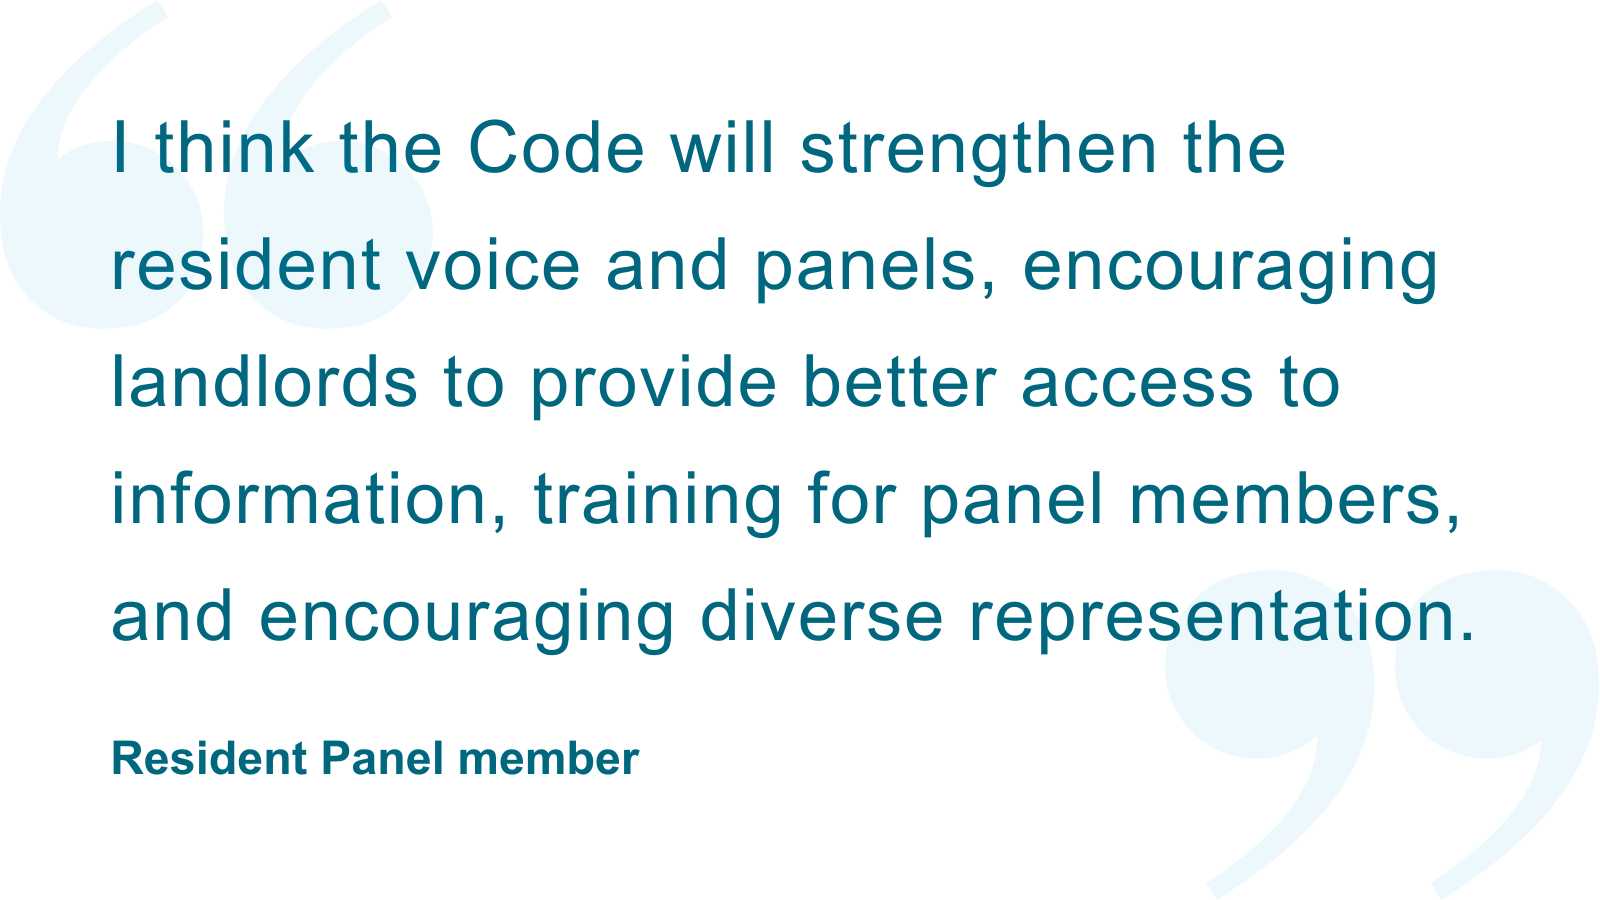 I think the Code will strengthen the resident voice and panels, including encouraging landlords to provide better access to information, training for panel members, and encouraging diverse representation.